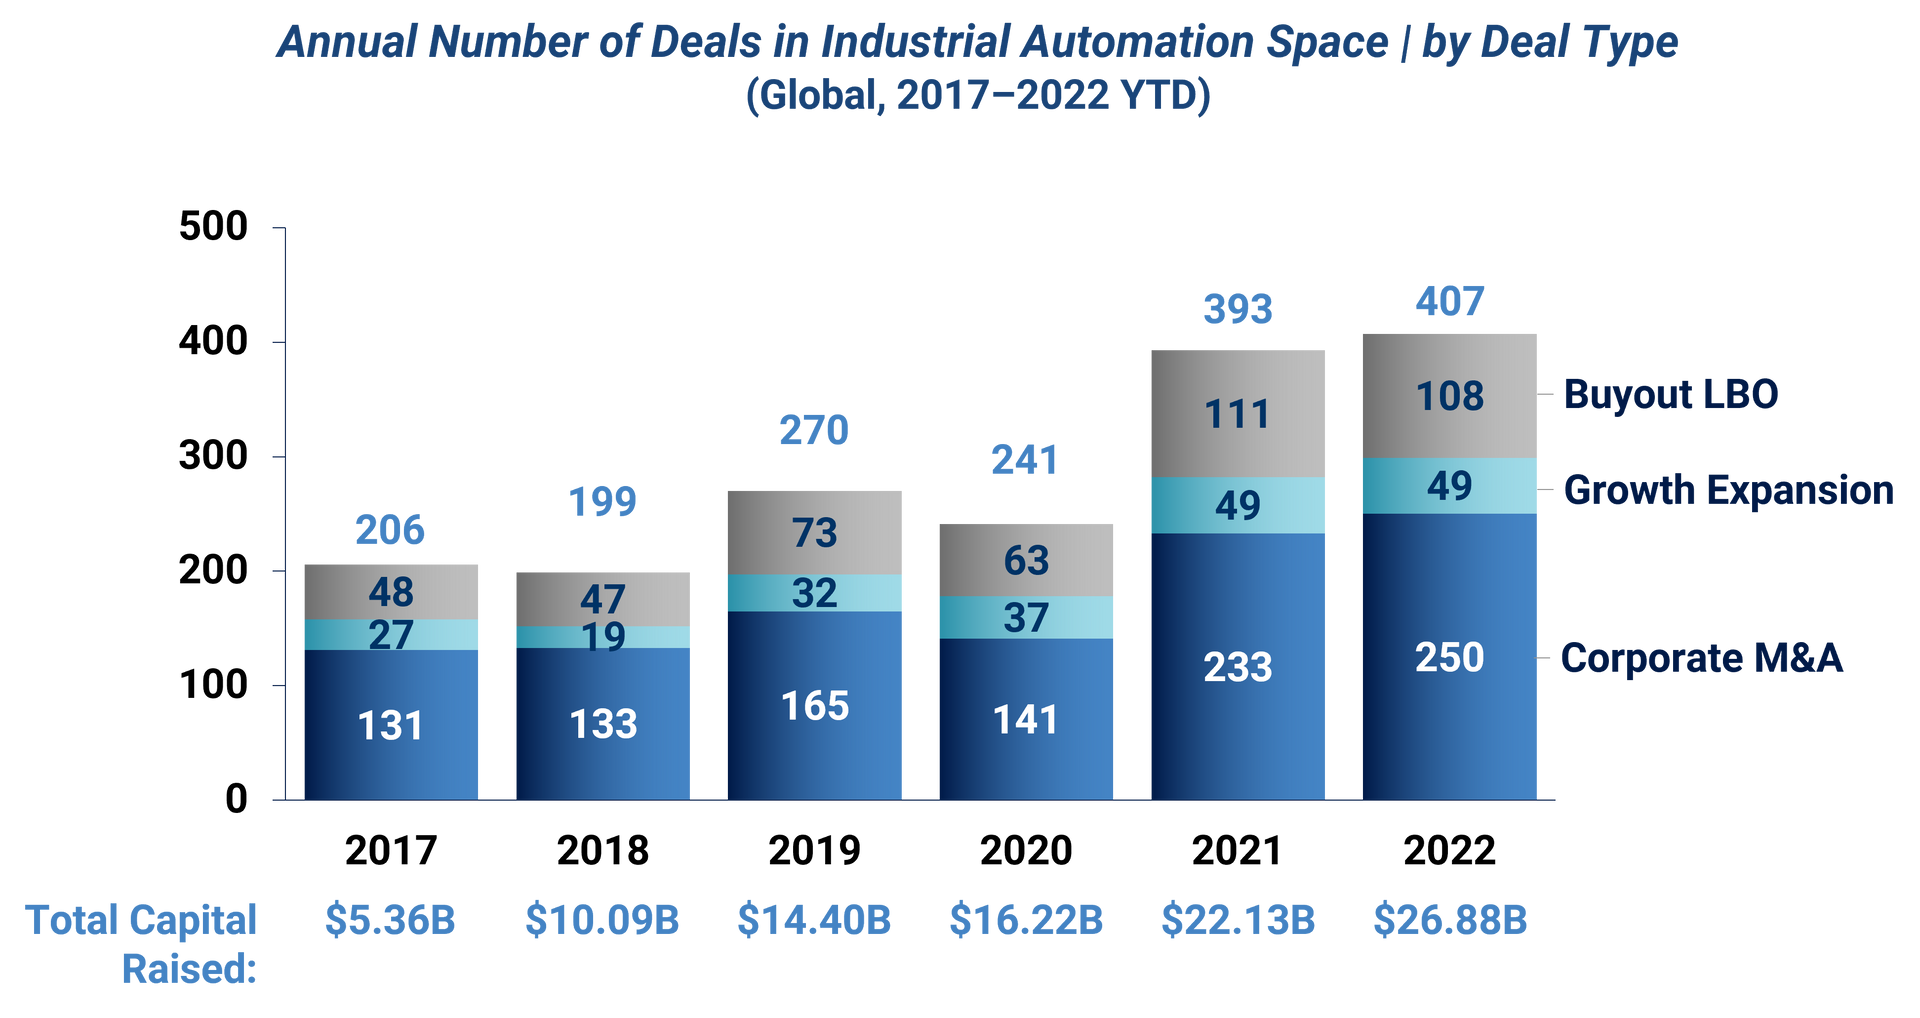 A chart depicting the annual number of deals in the industrial automation space by deal type from 2017 to now. Deal types include buyout LBO, growth expansion, and corporate M&A. Trends show steady growth of total capital raised per year, resulting in $13.32B raised in 2022.